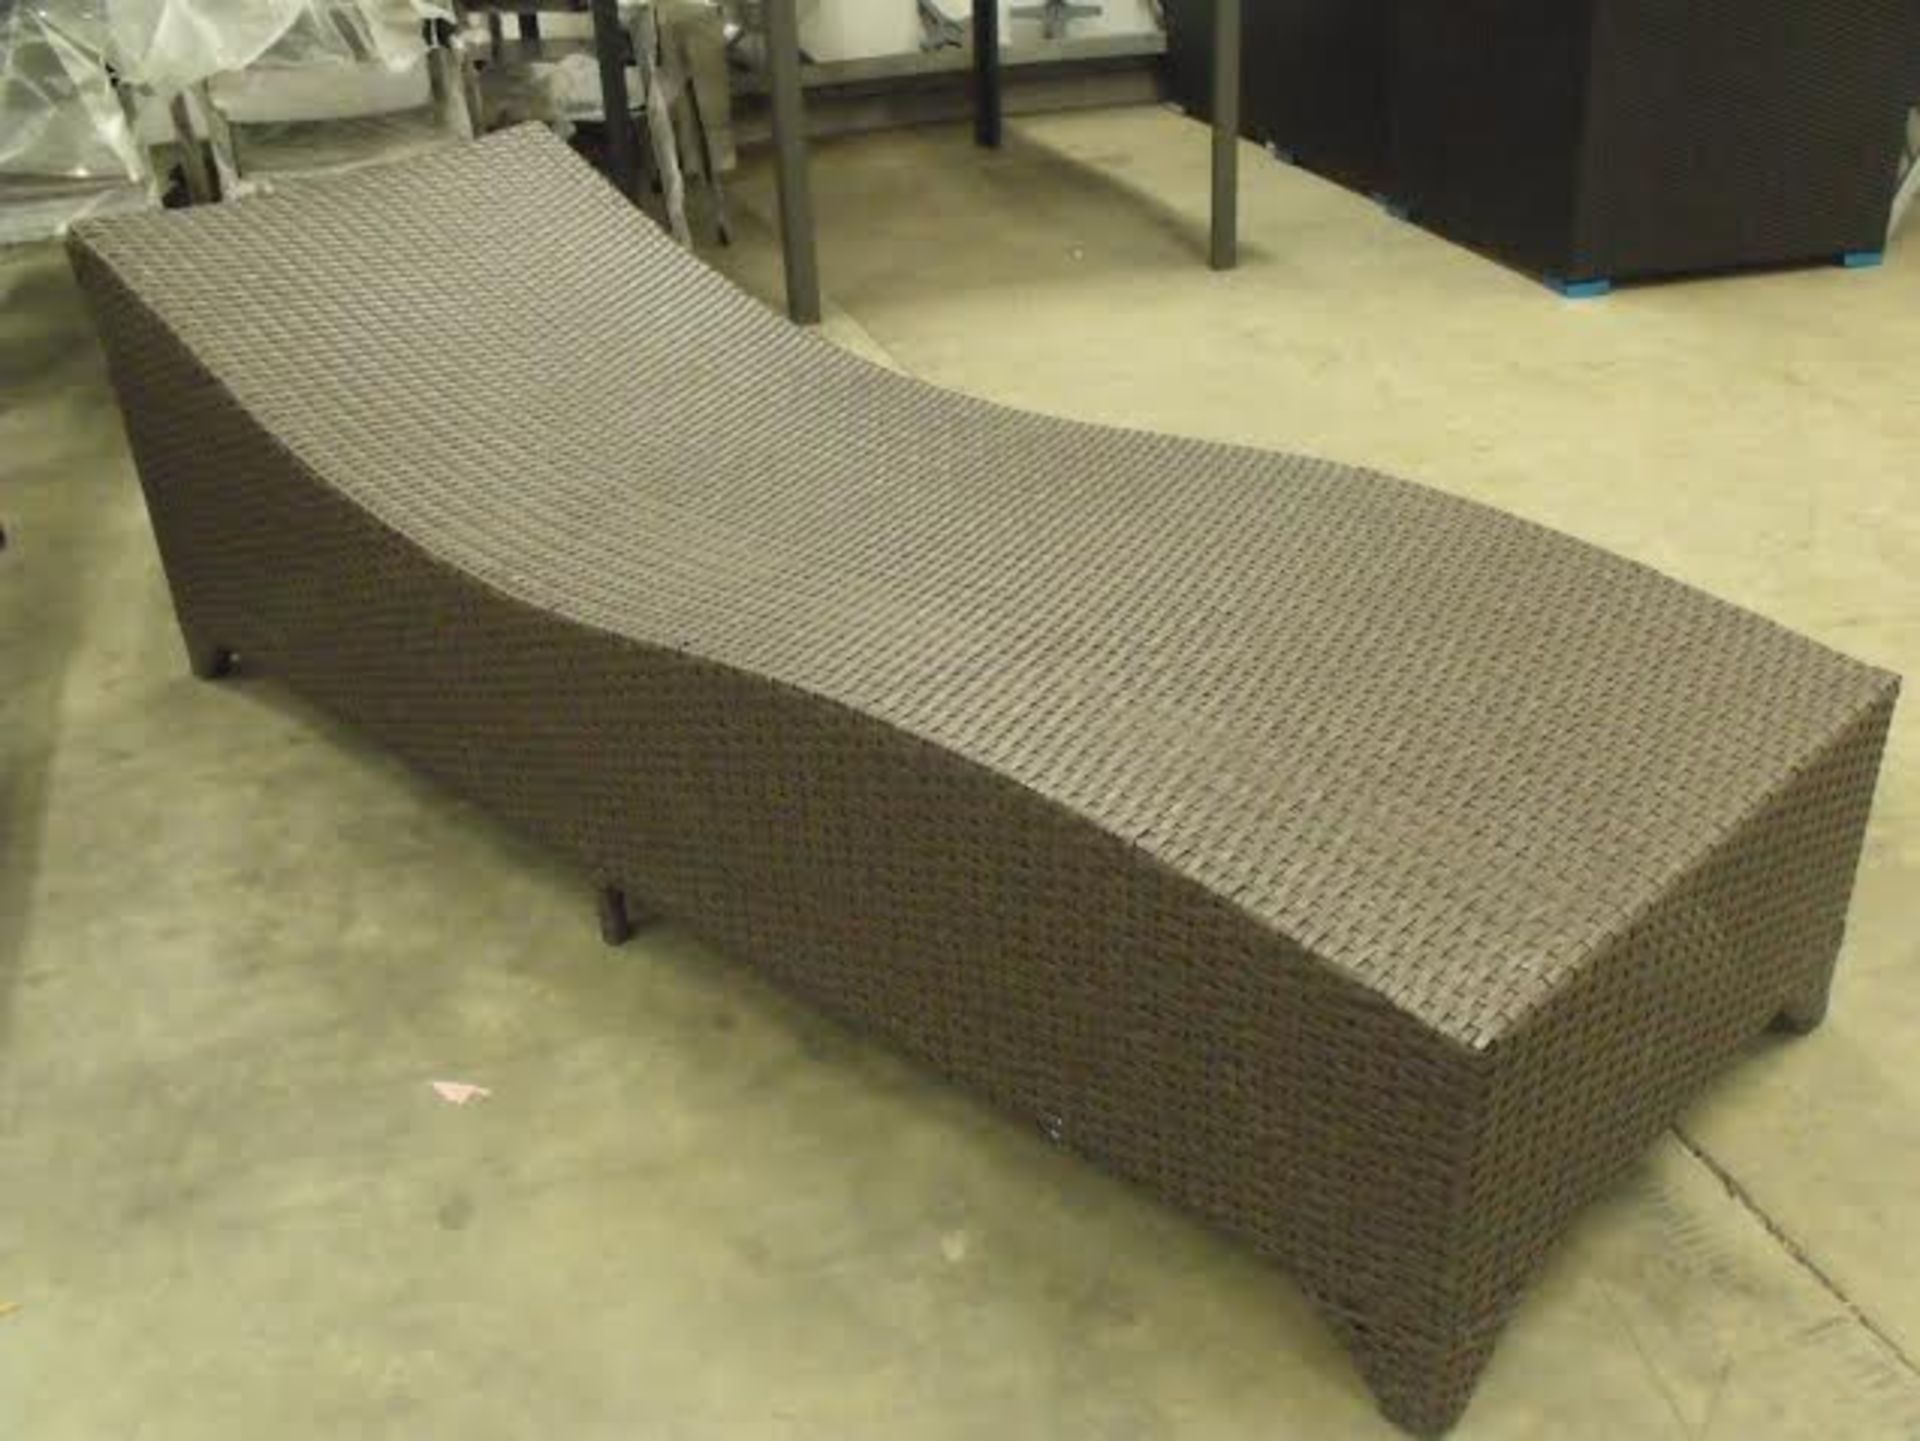 RATTAN SUNLOUNGER ALL WEATHER PU MULTI BROWN RATTAN ONE PIECE CONSTRUCTION ALUMINIUM FRAME SIZE - Image 2 of 2